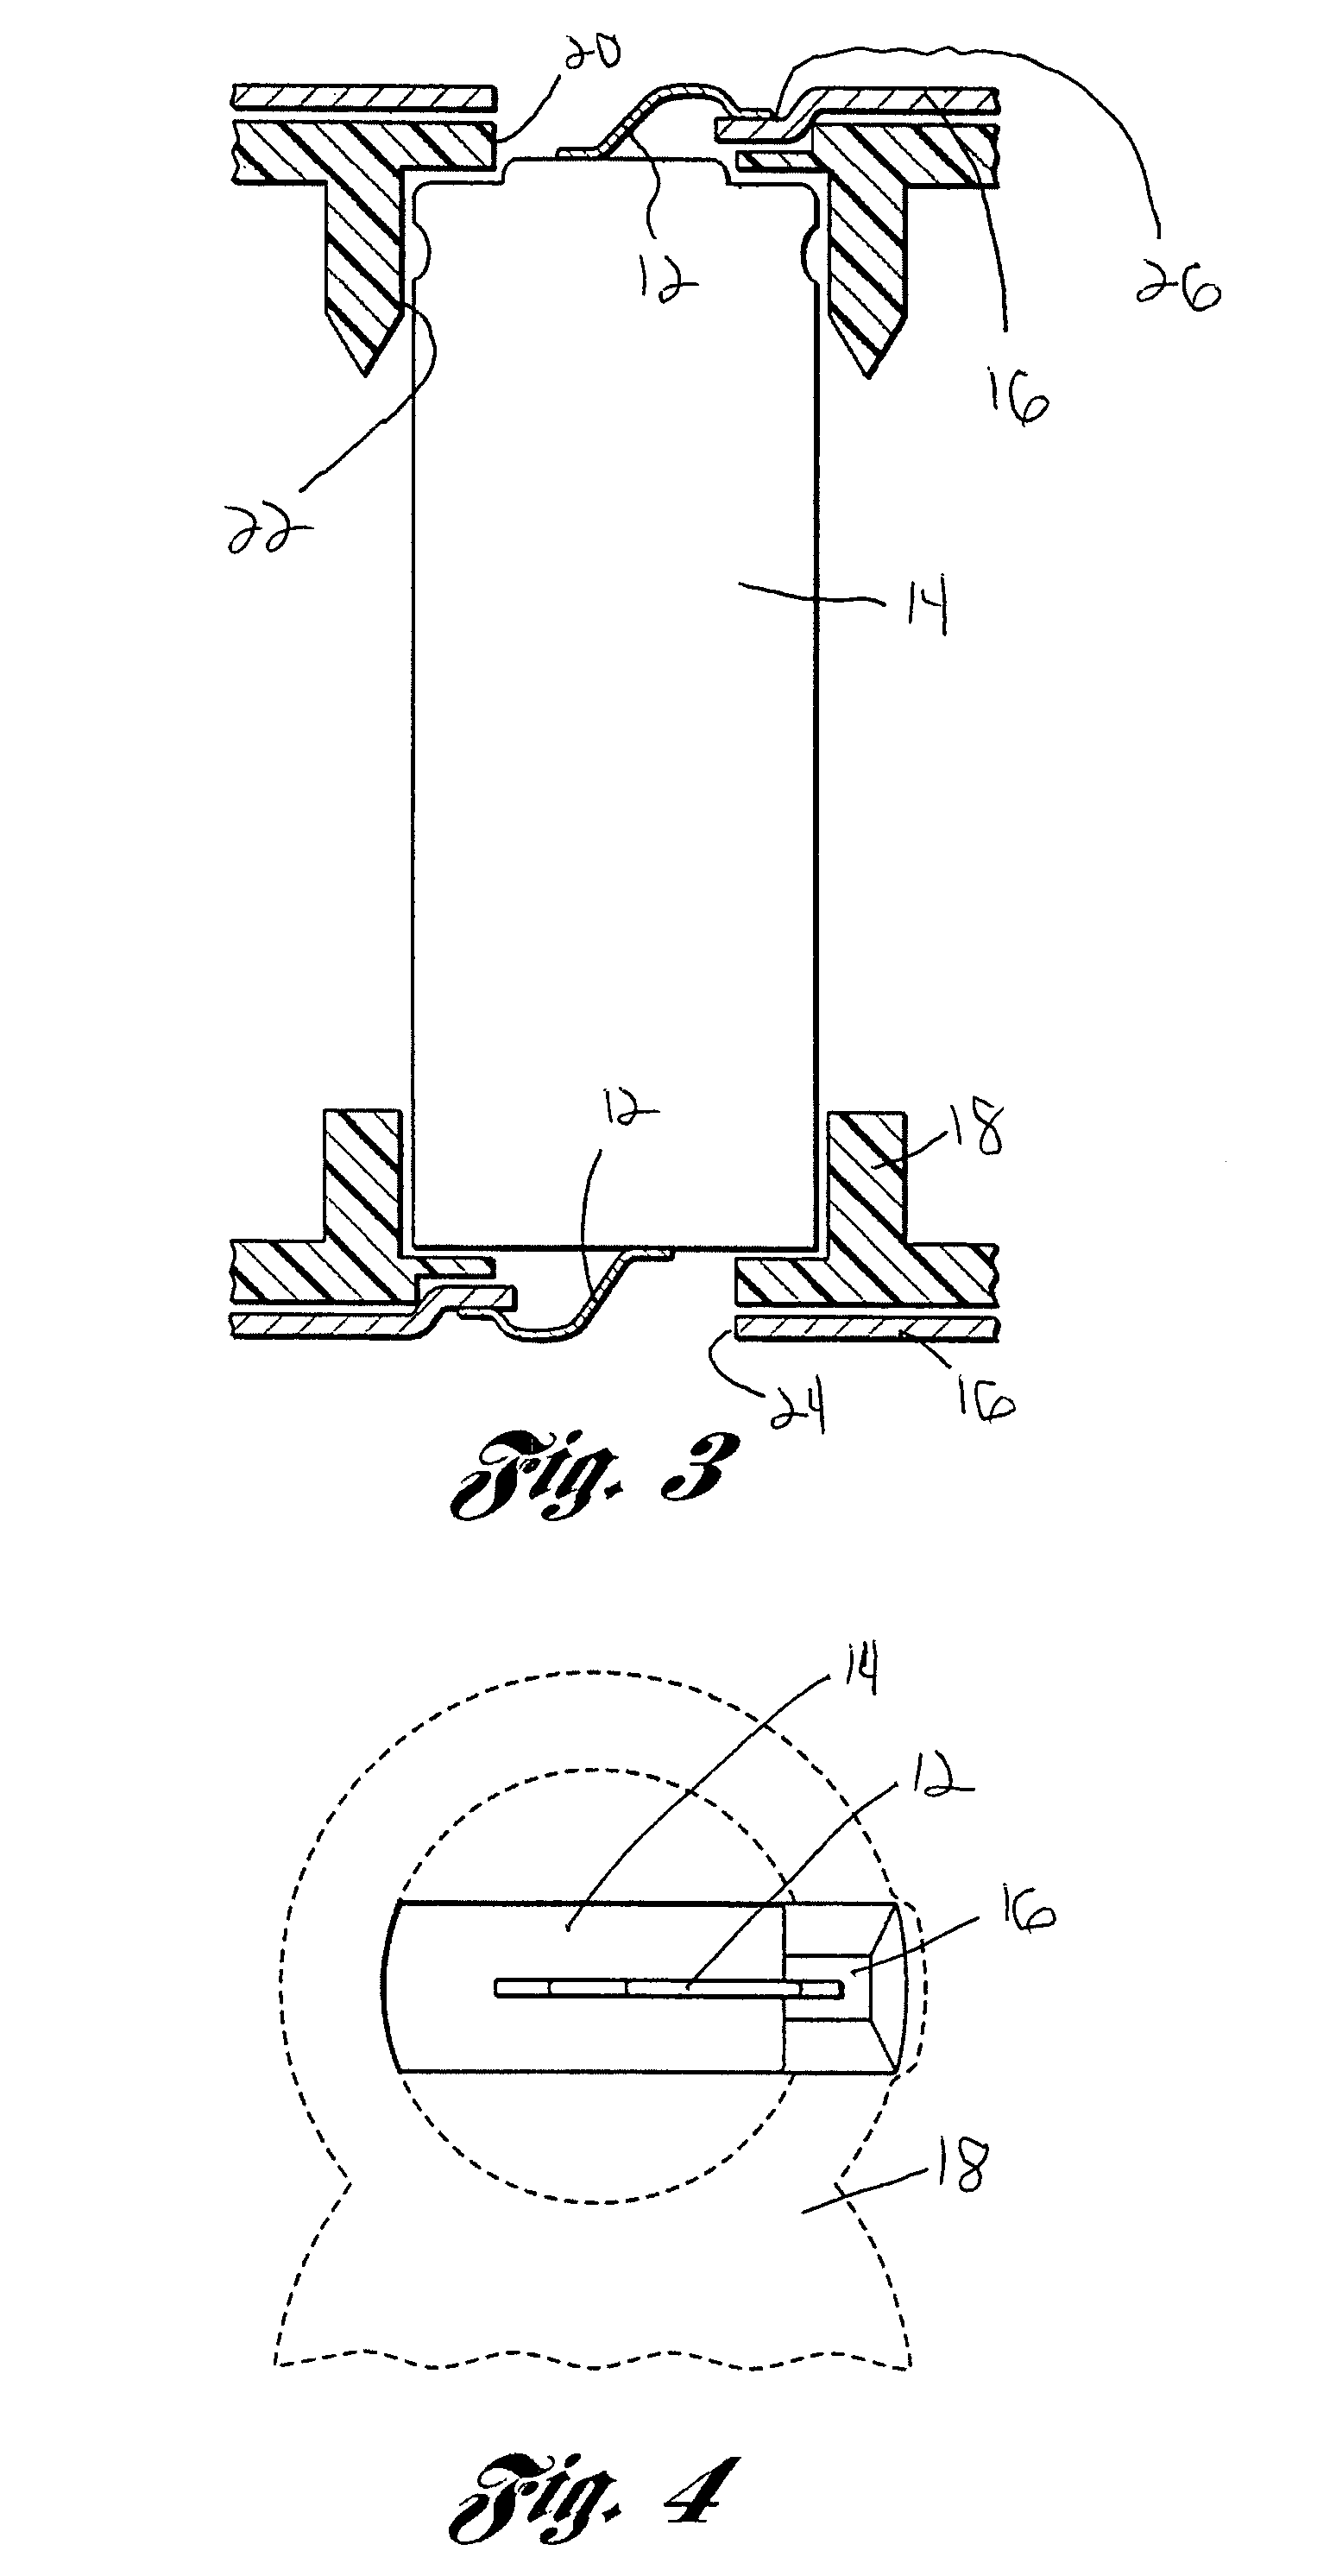 Tunable frangible battery pack system